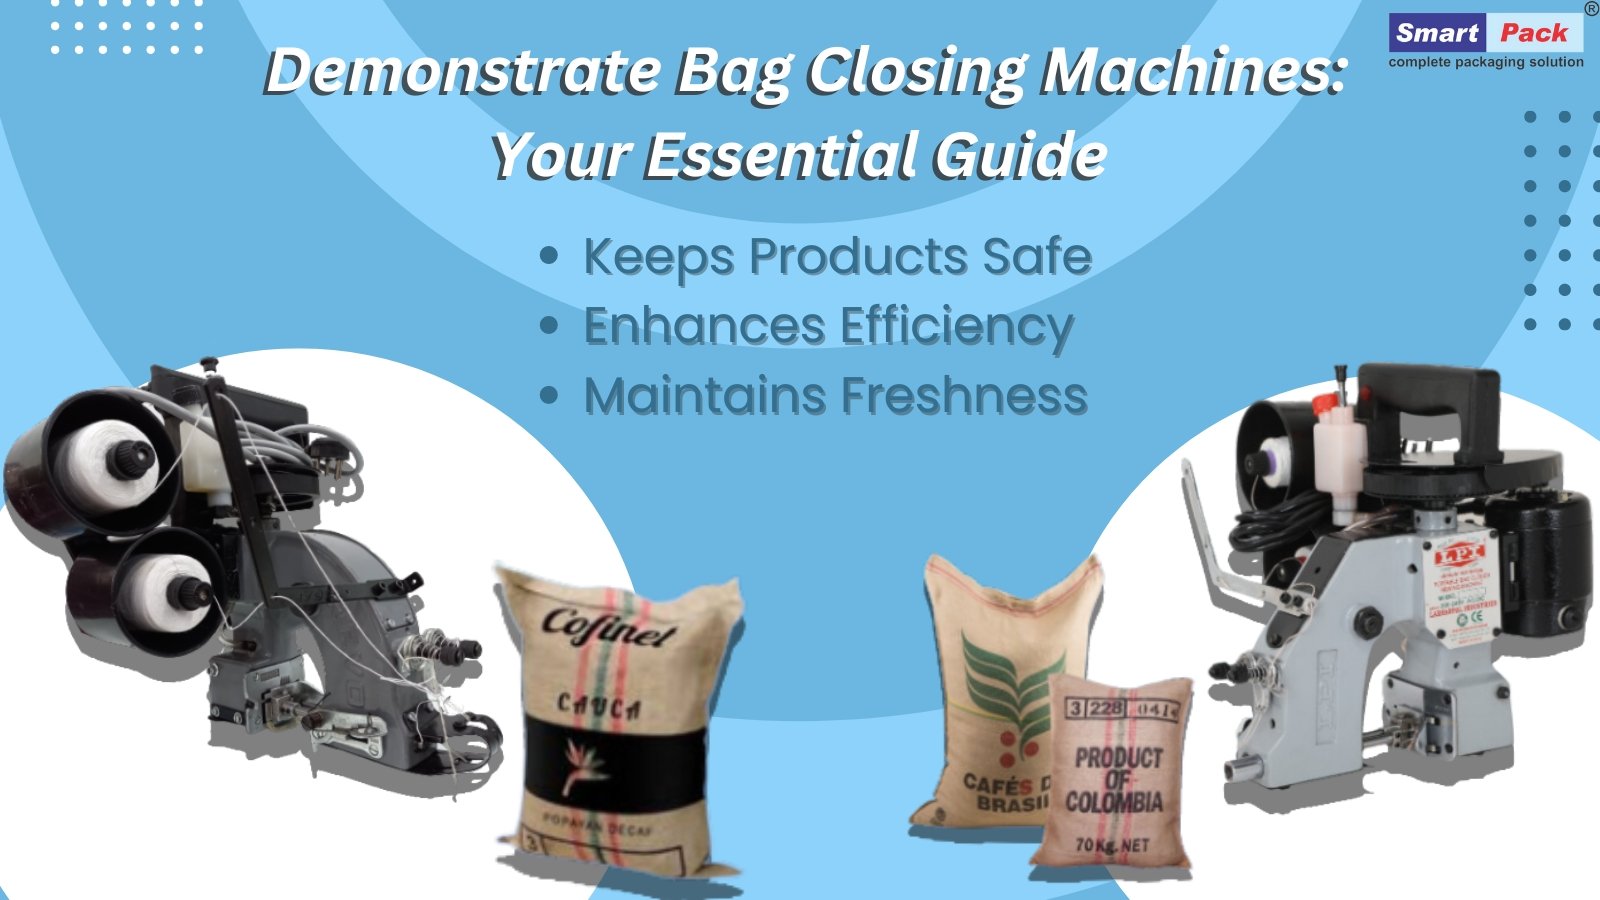 Demonstrate Bag Closing Machines: Your Essential Guide